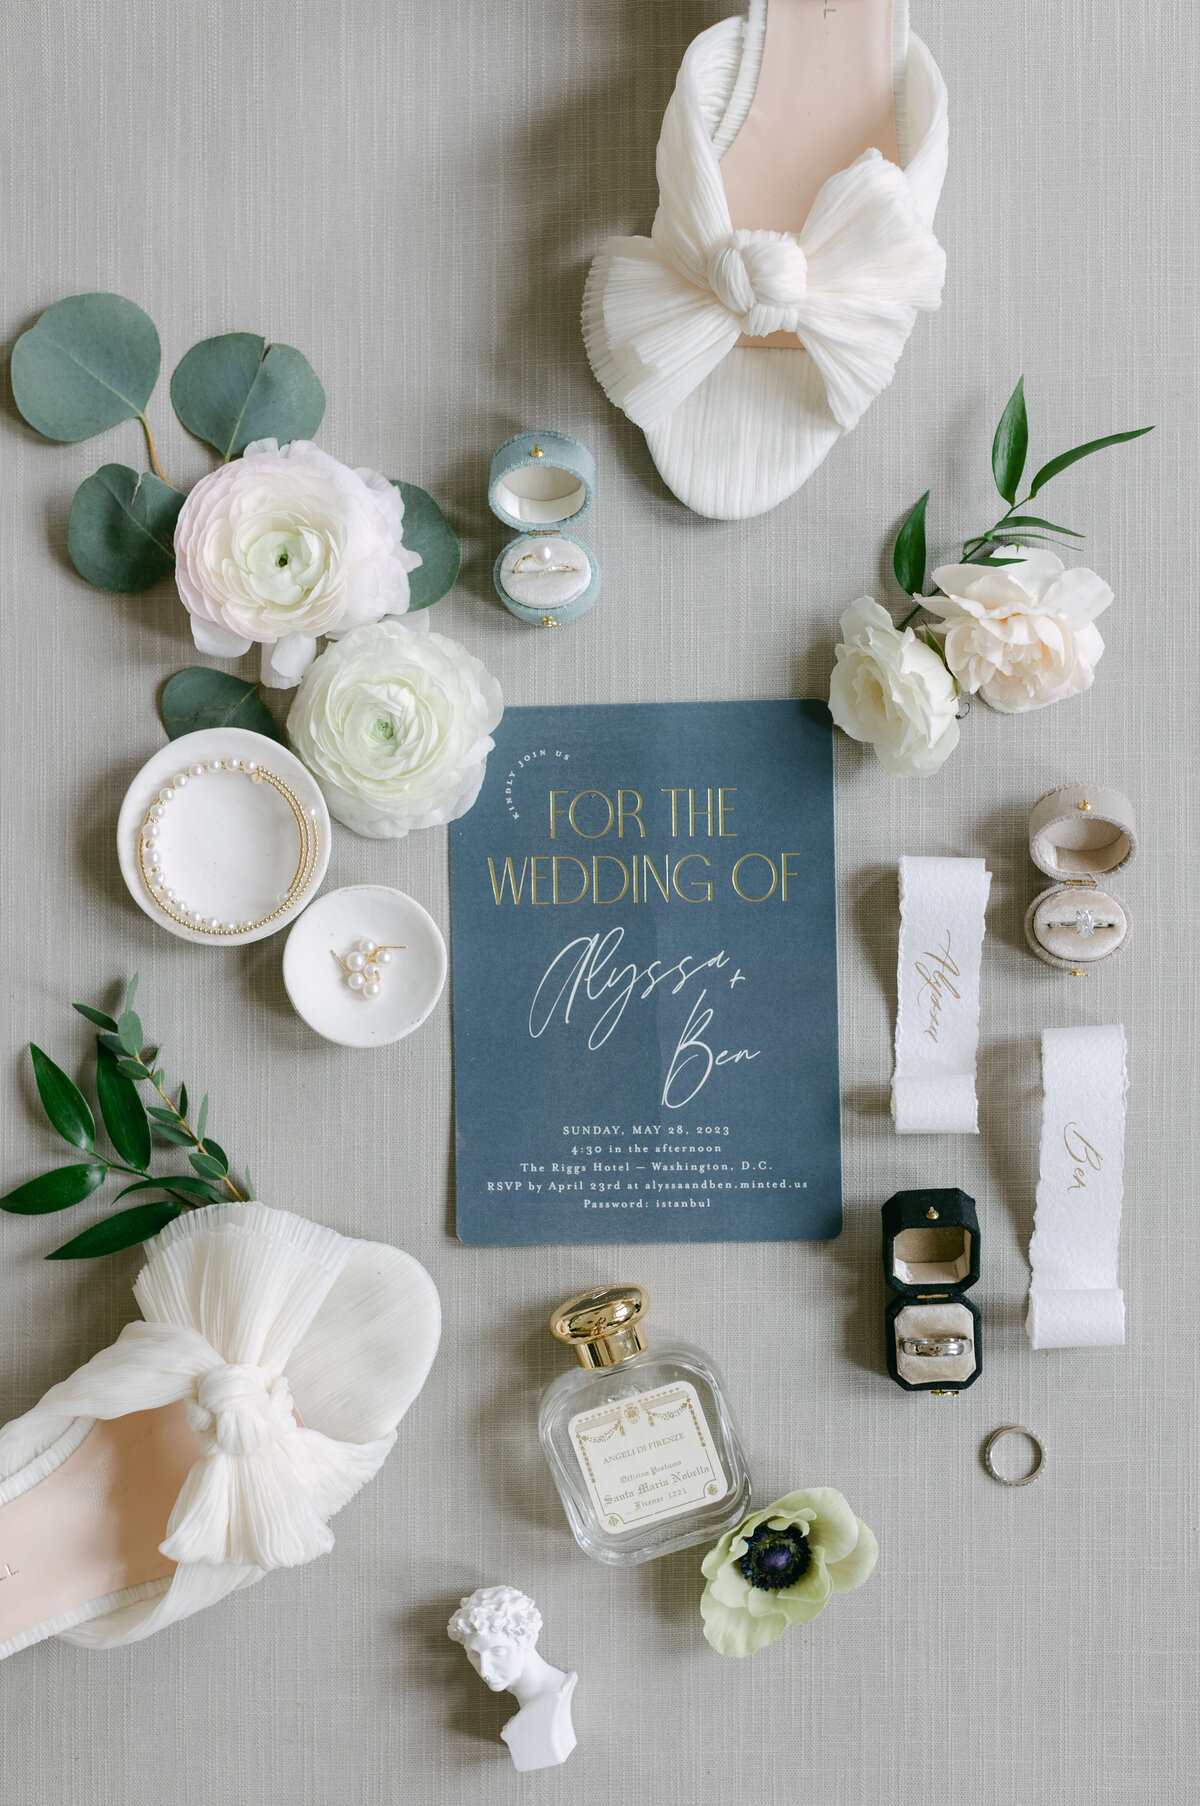 An invitation sits on a soft background.